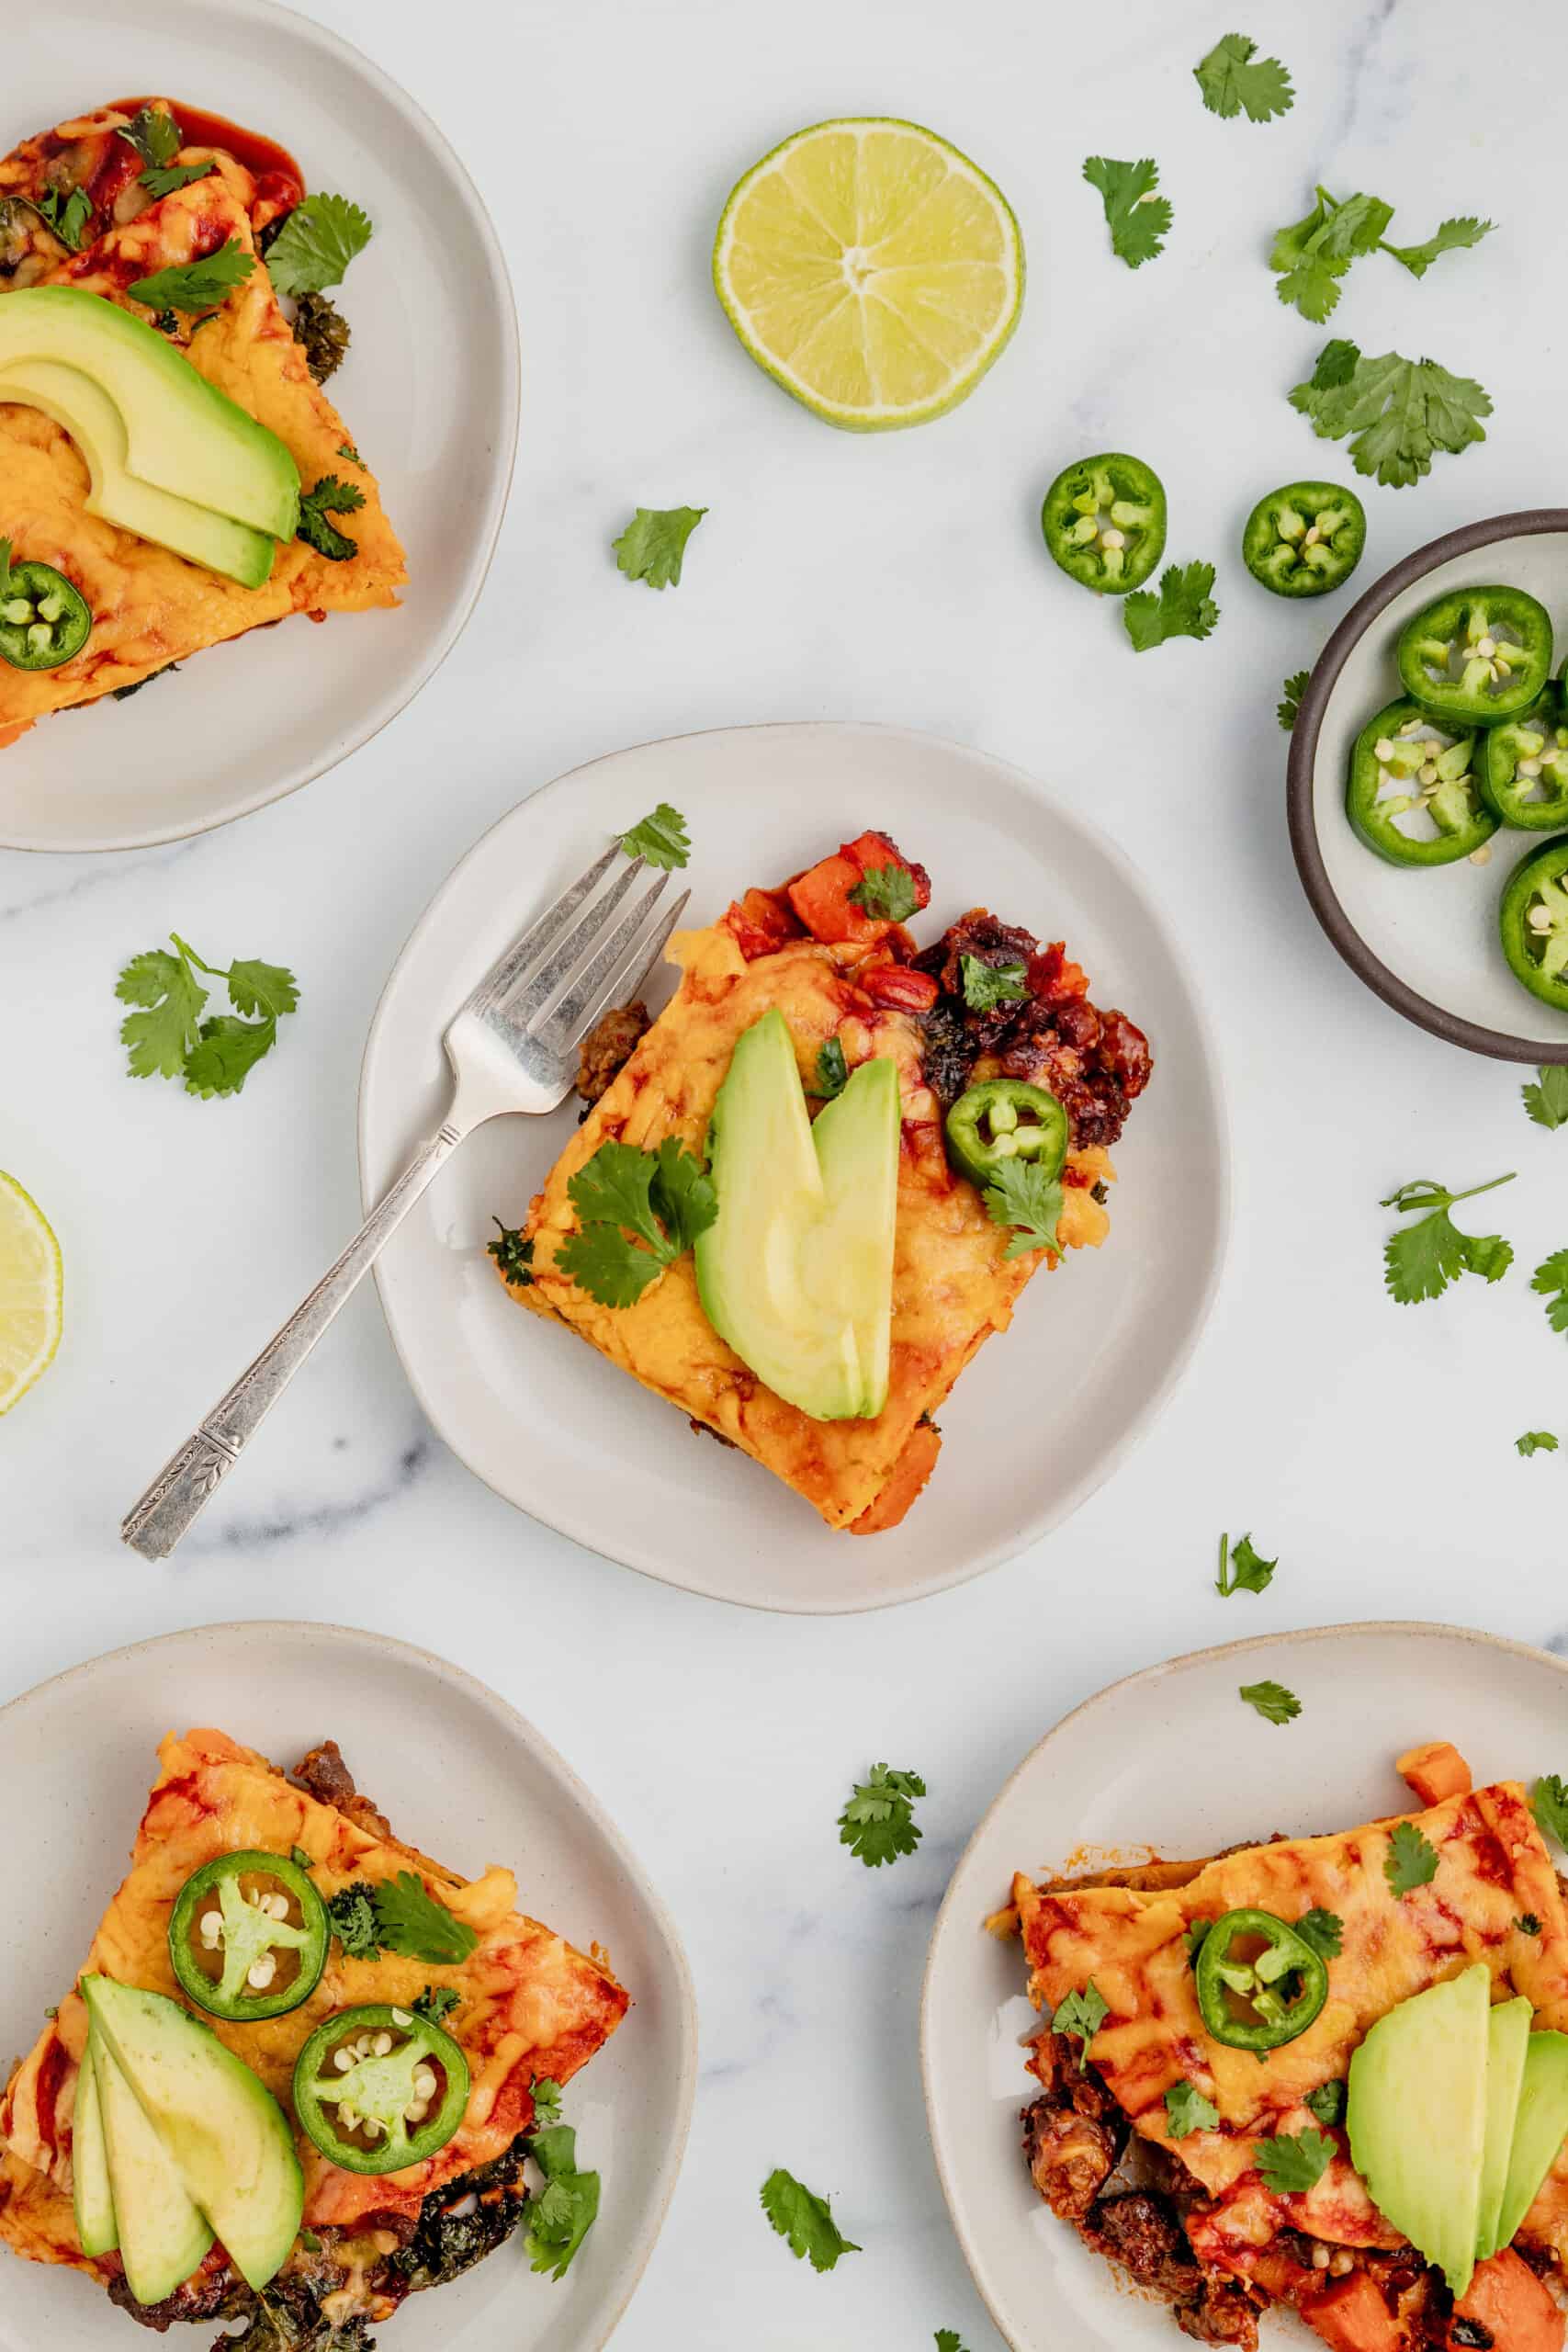 Four plates with slices of gluten free enchilada casserole topped with cilantro, limes, and avocado.